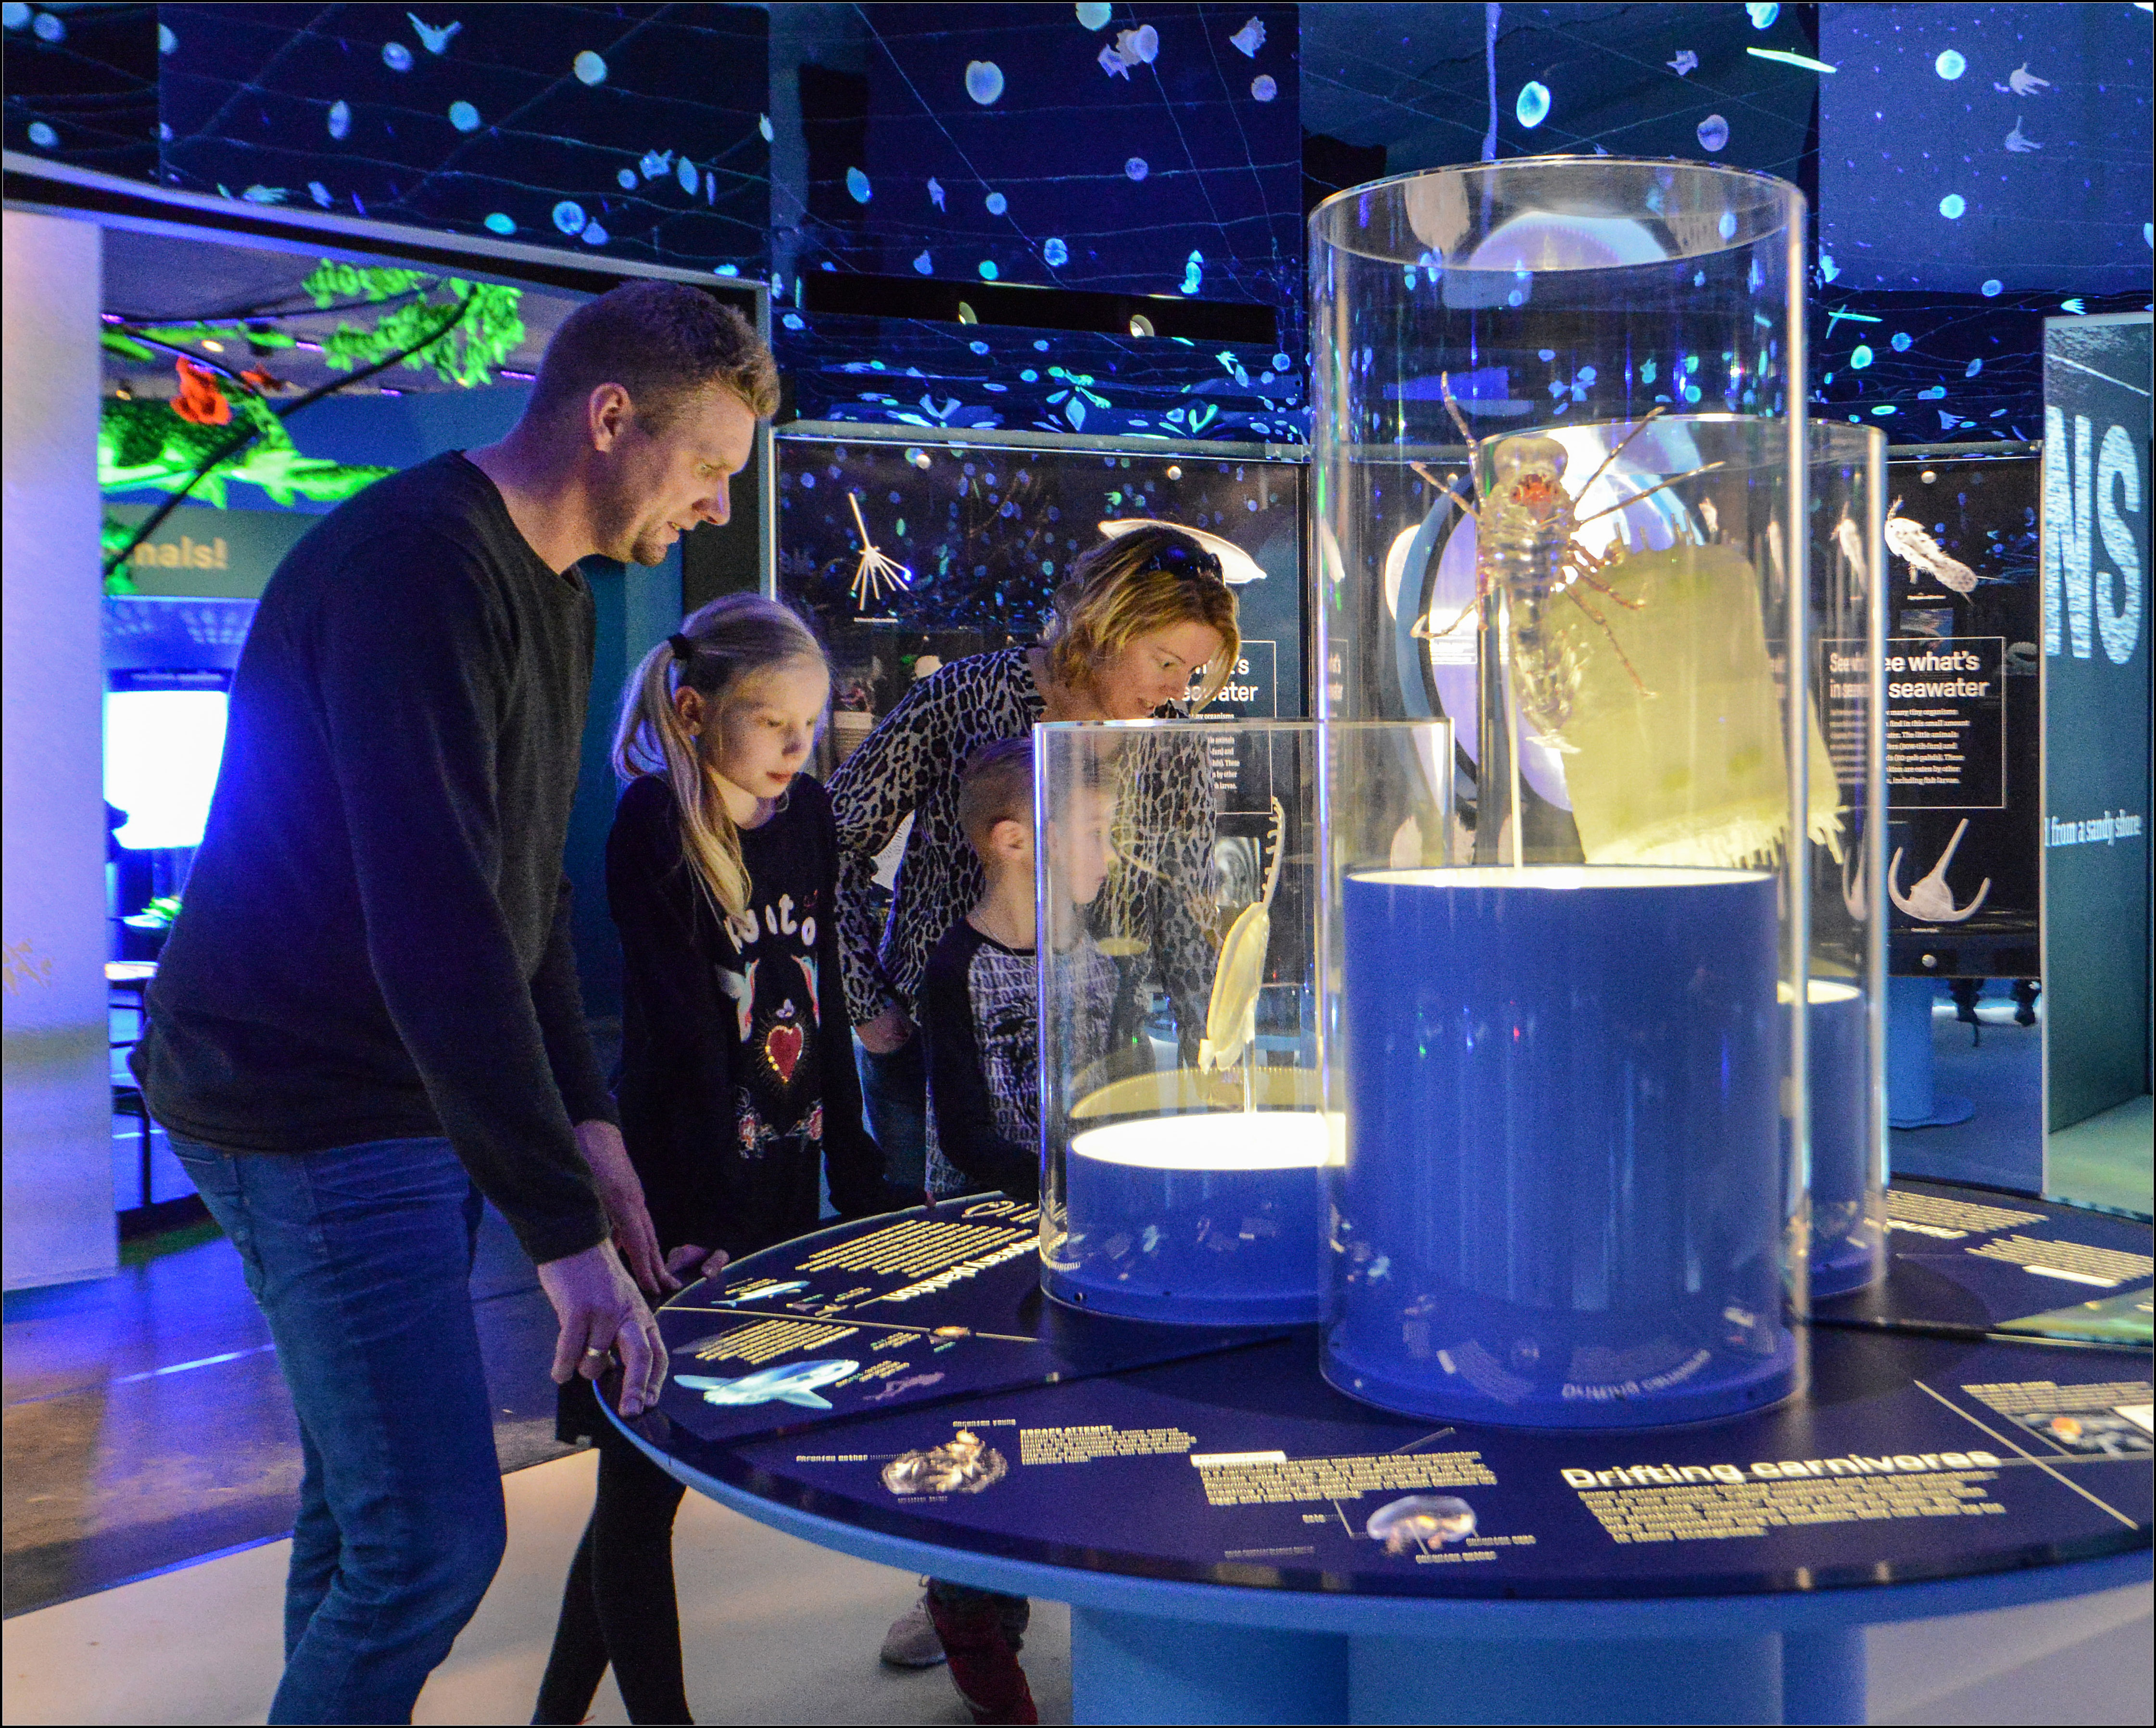 An adult and child playing the plankton-matching interactive game.